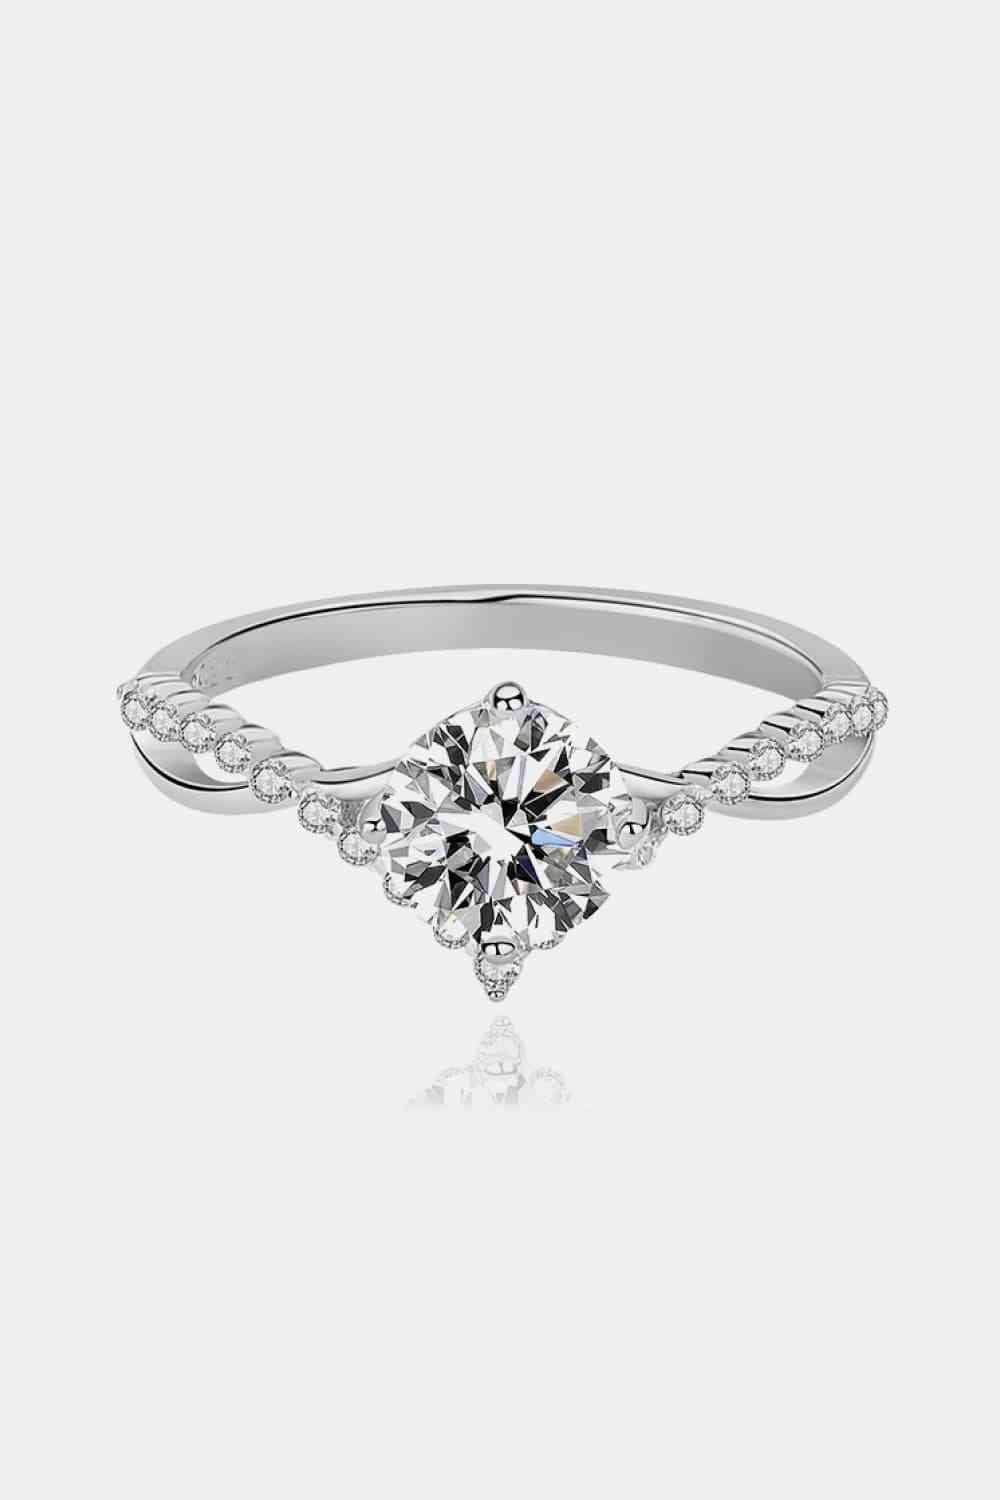 a diamond engagement ring with a twisted band